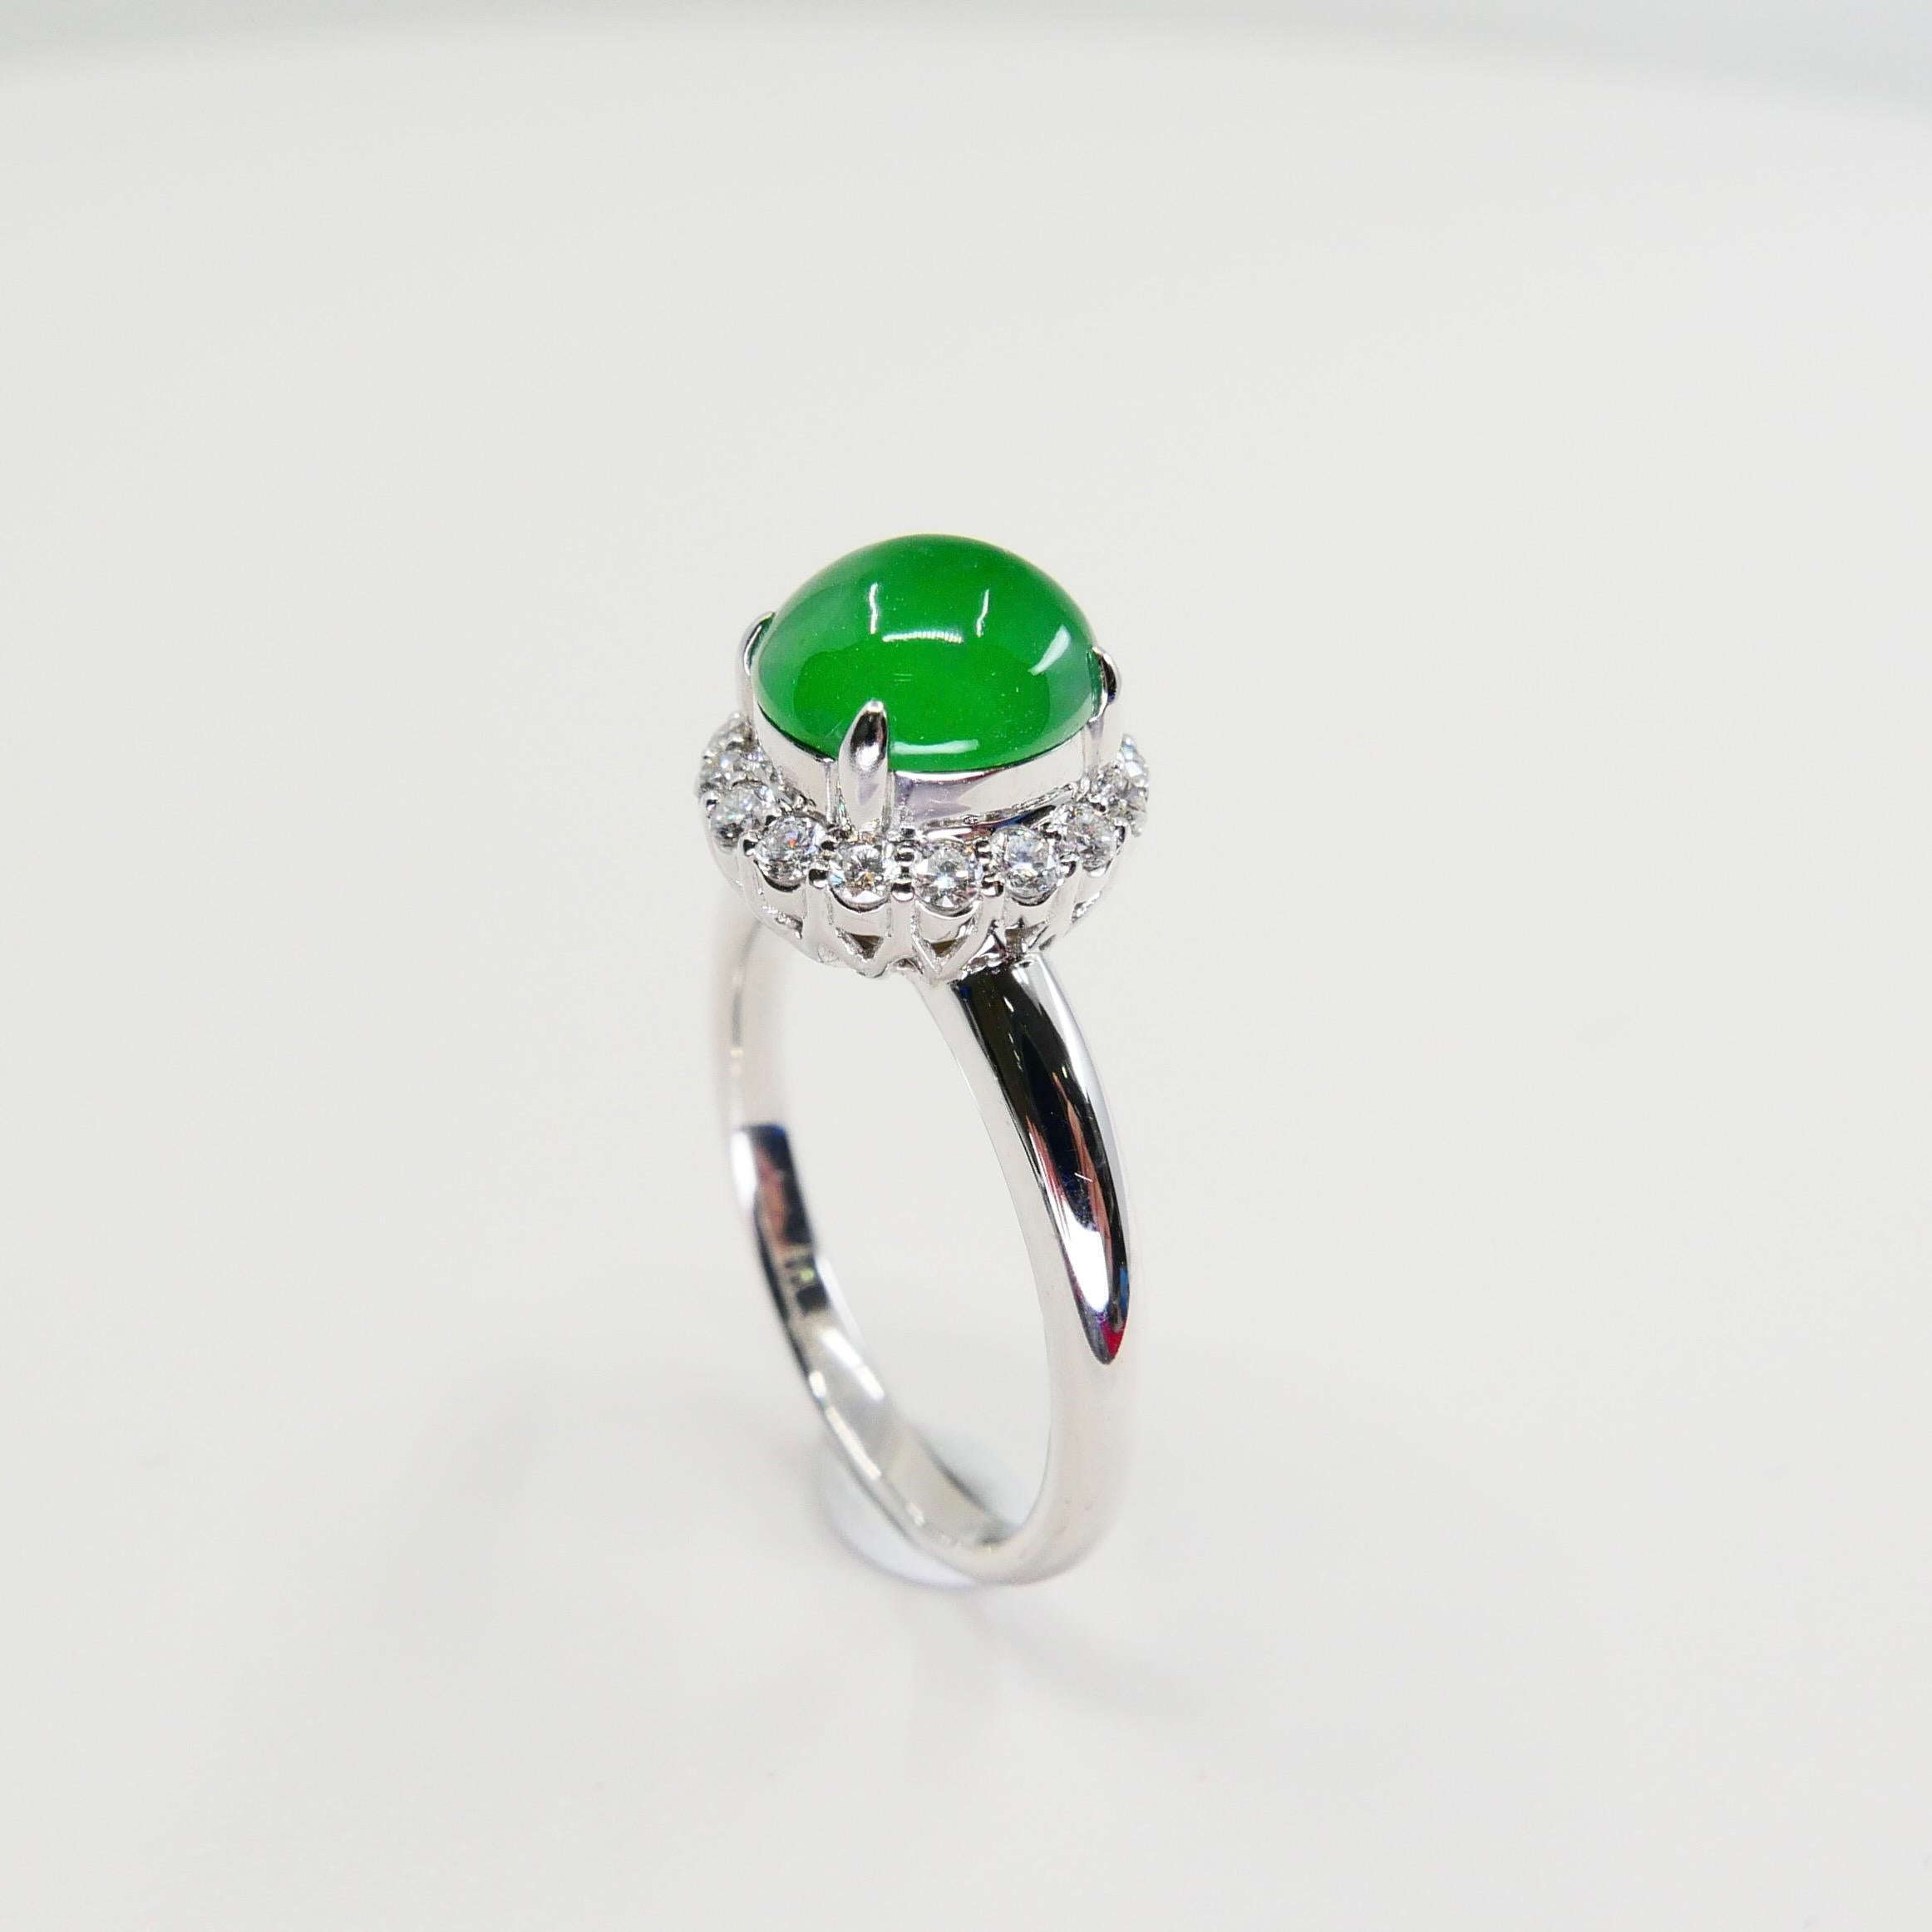 Certified Type A Icy Apple Green Jadeite Jade and Diamond Ring, Super Glow For Sale 4